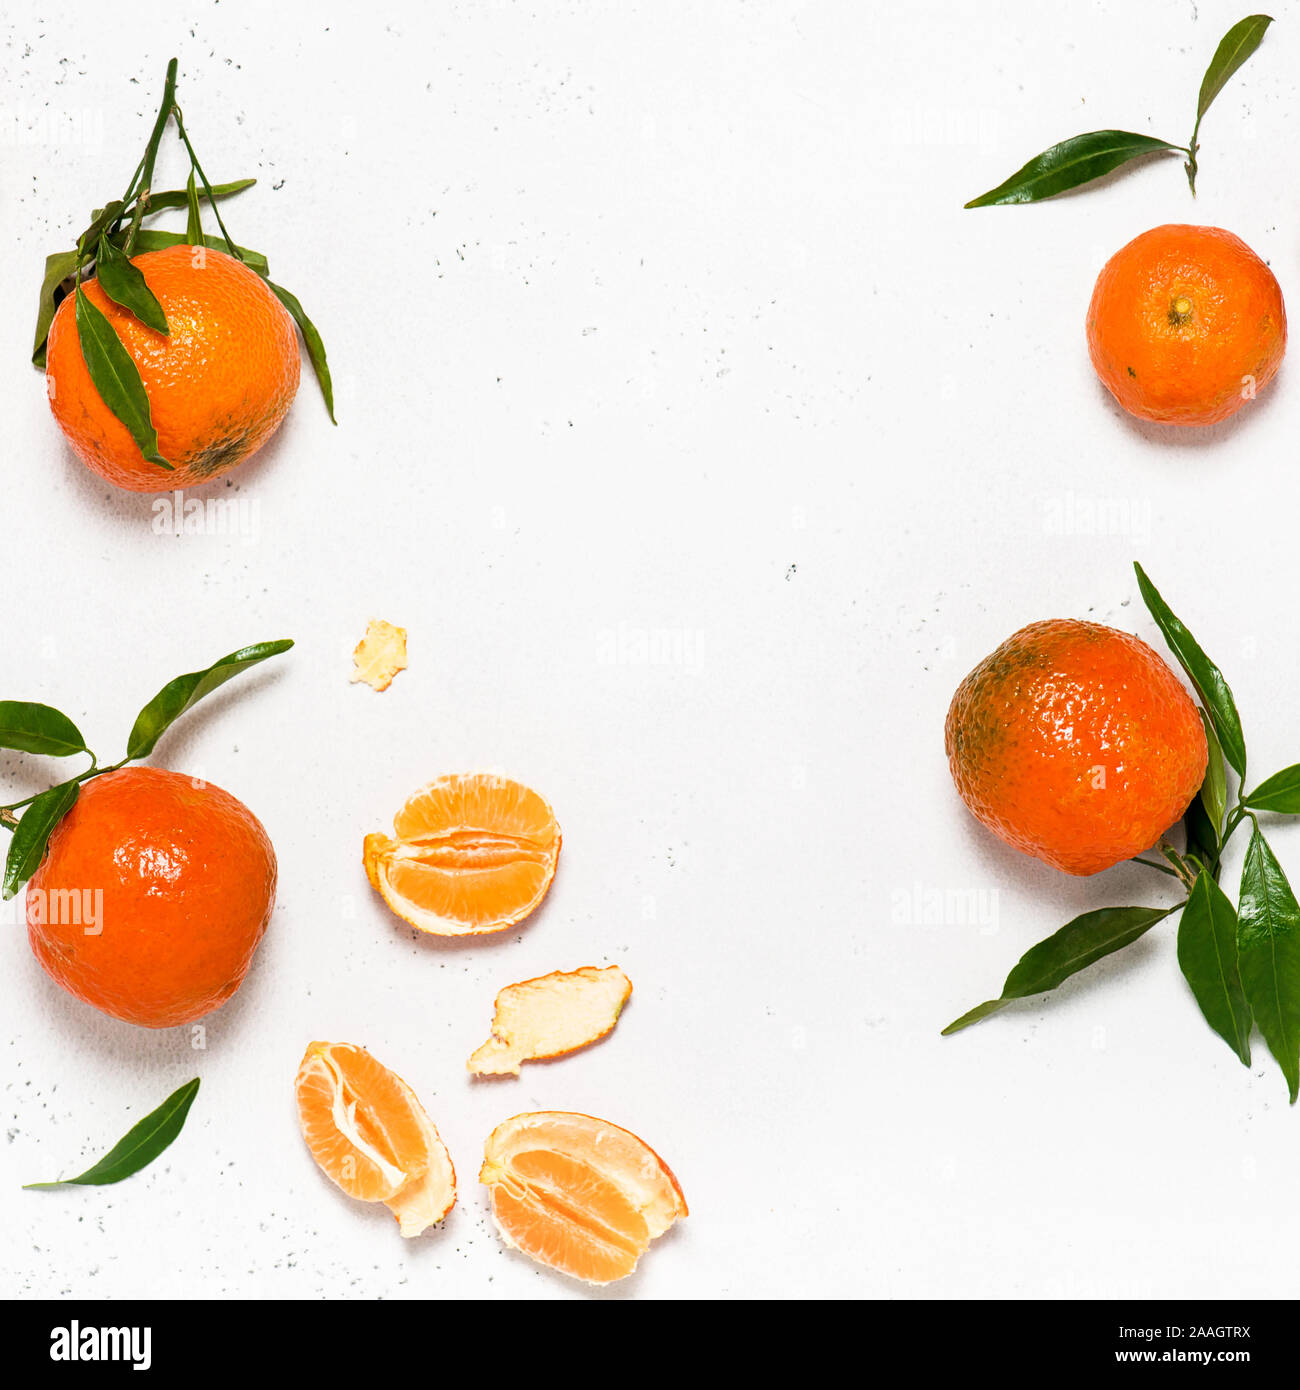 Organic tangerines (mandarins, clementines, citrus fruits) with leaves. Copy space. Square image. Stock Photo